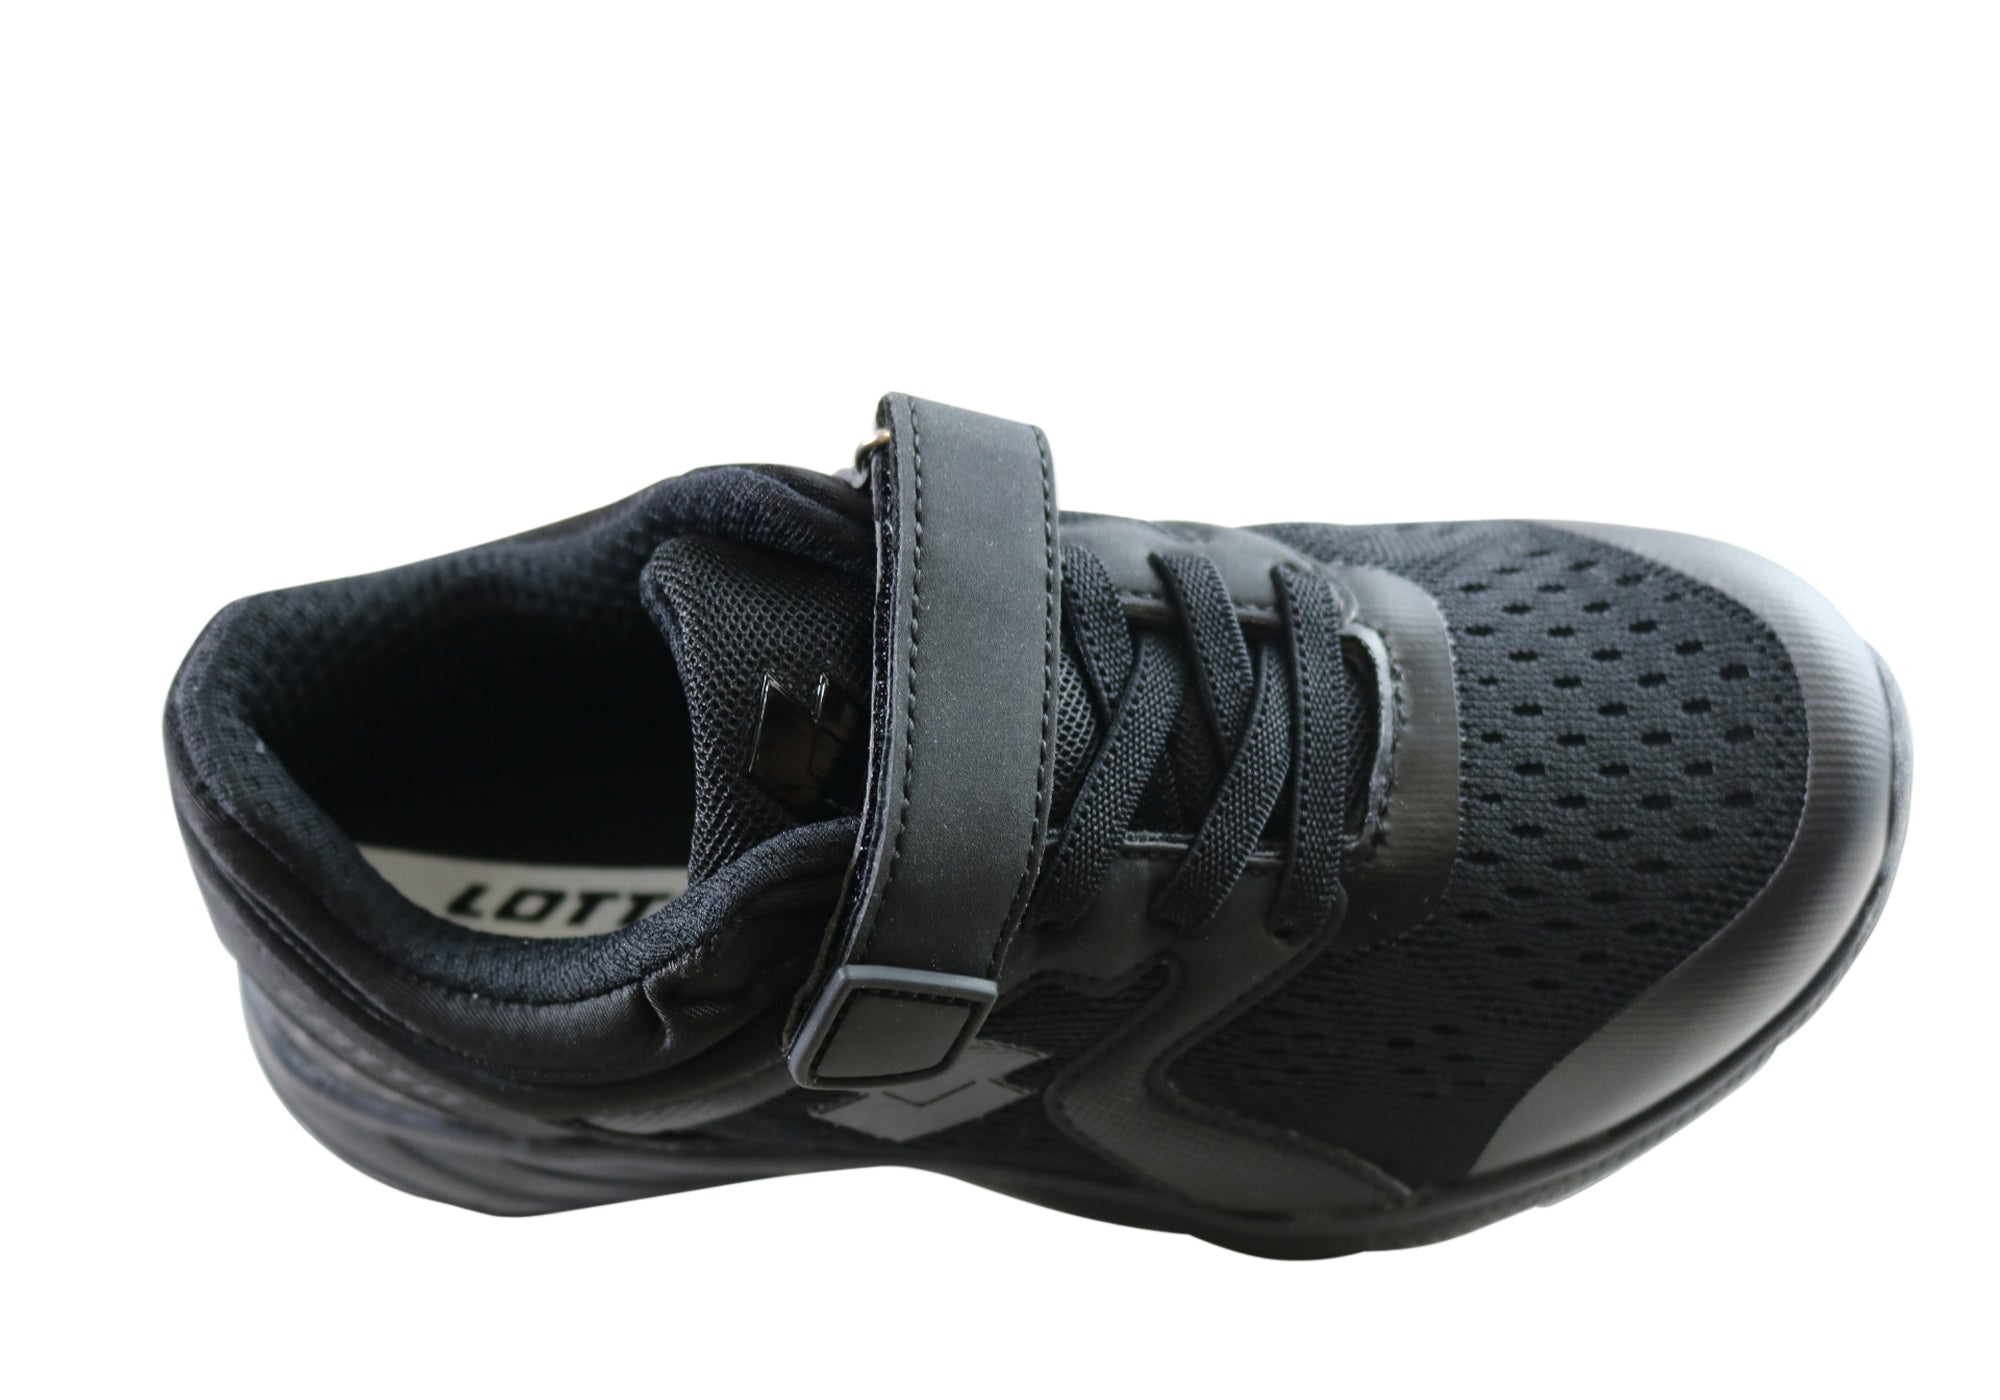 Lotto Triple Black Youth Kids Adjustable Strap Athletic Shoes